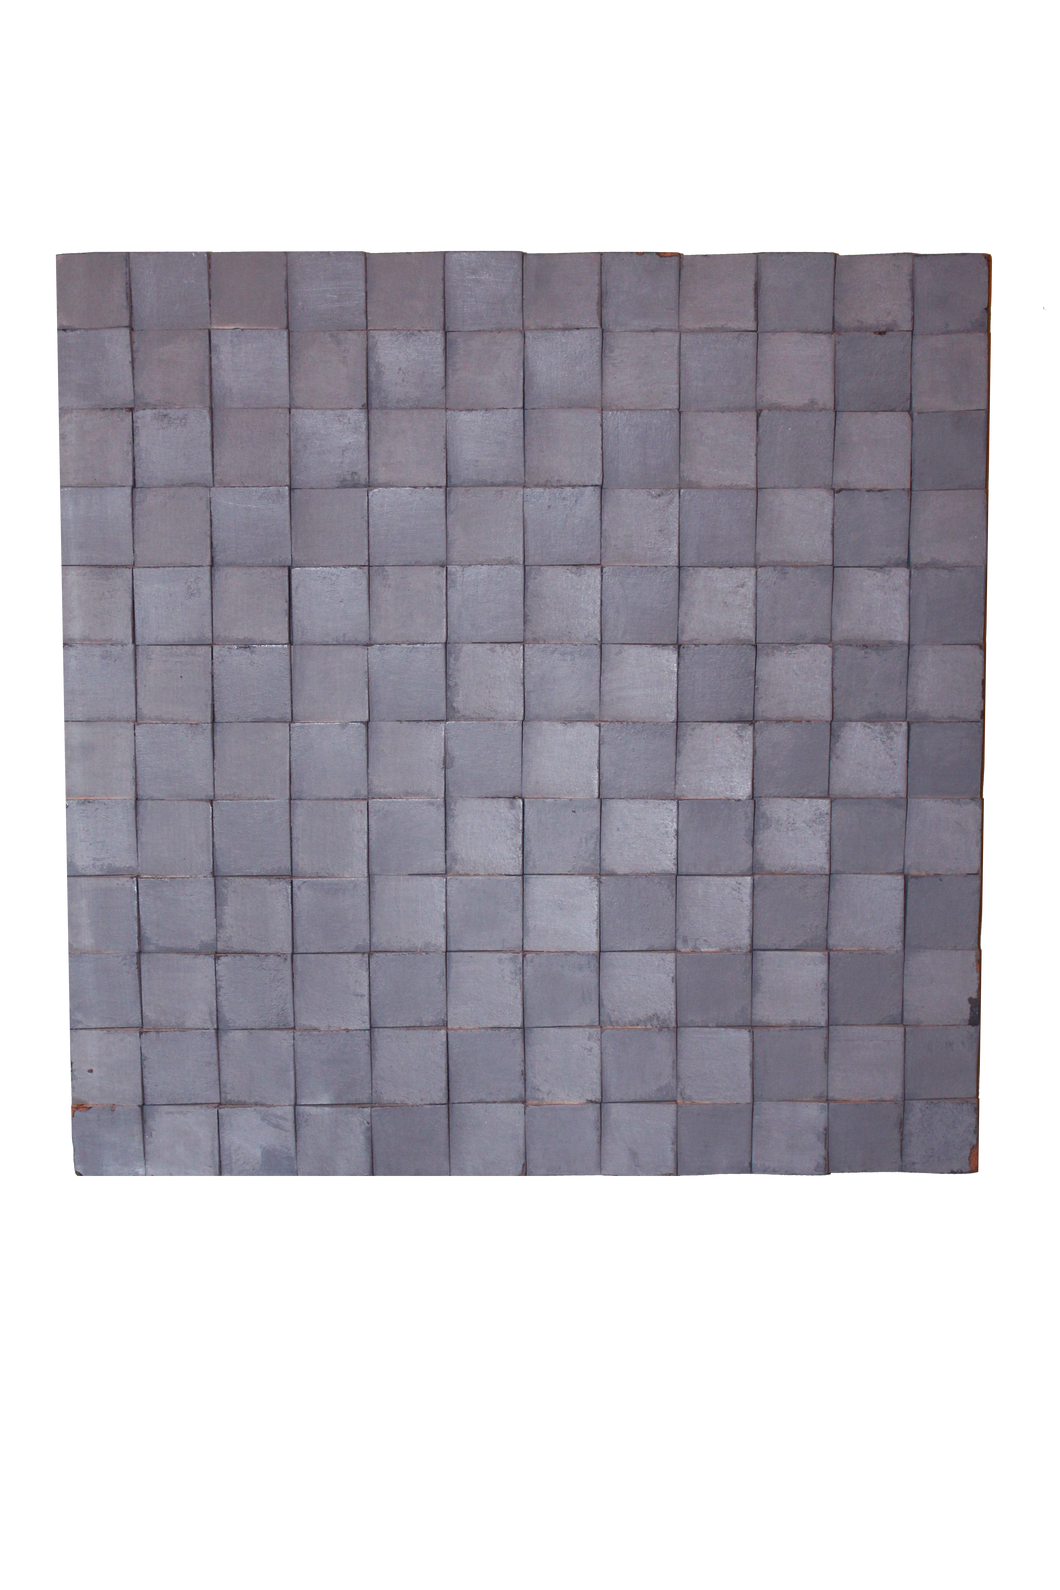 The Home Wall Square Panel 3D